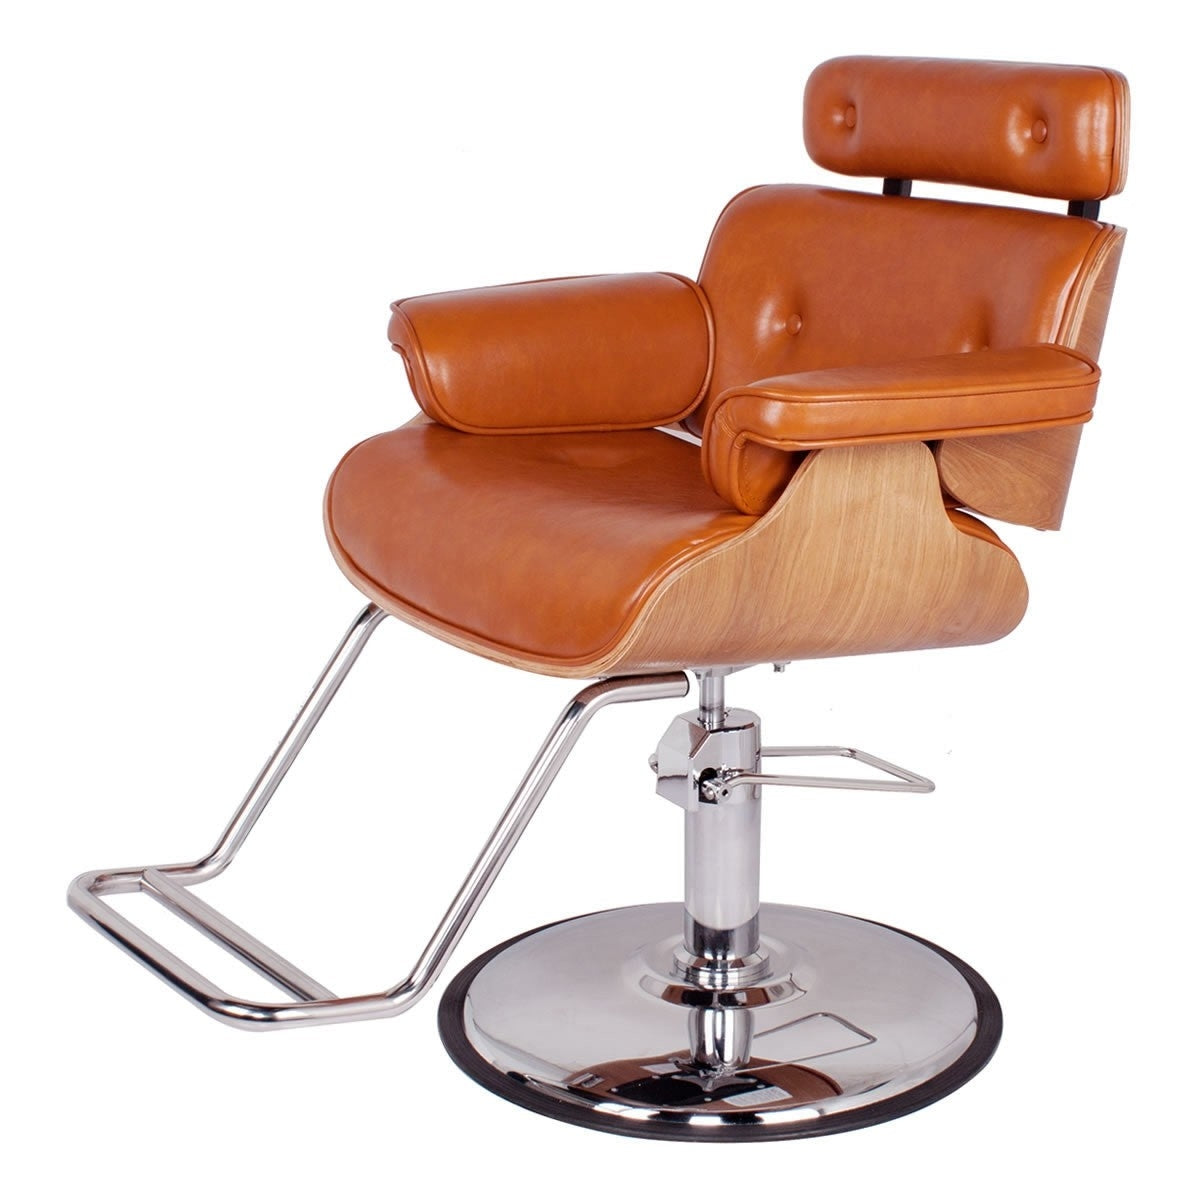 COCOA Salon Styling Chair